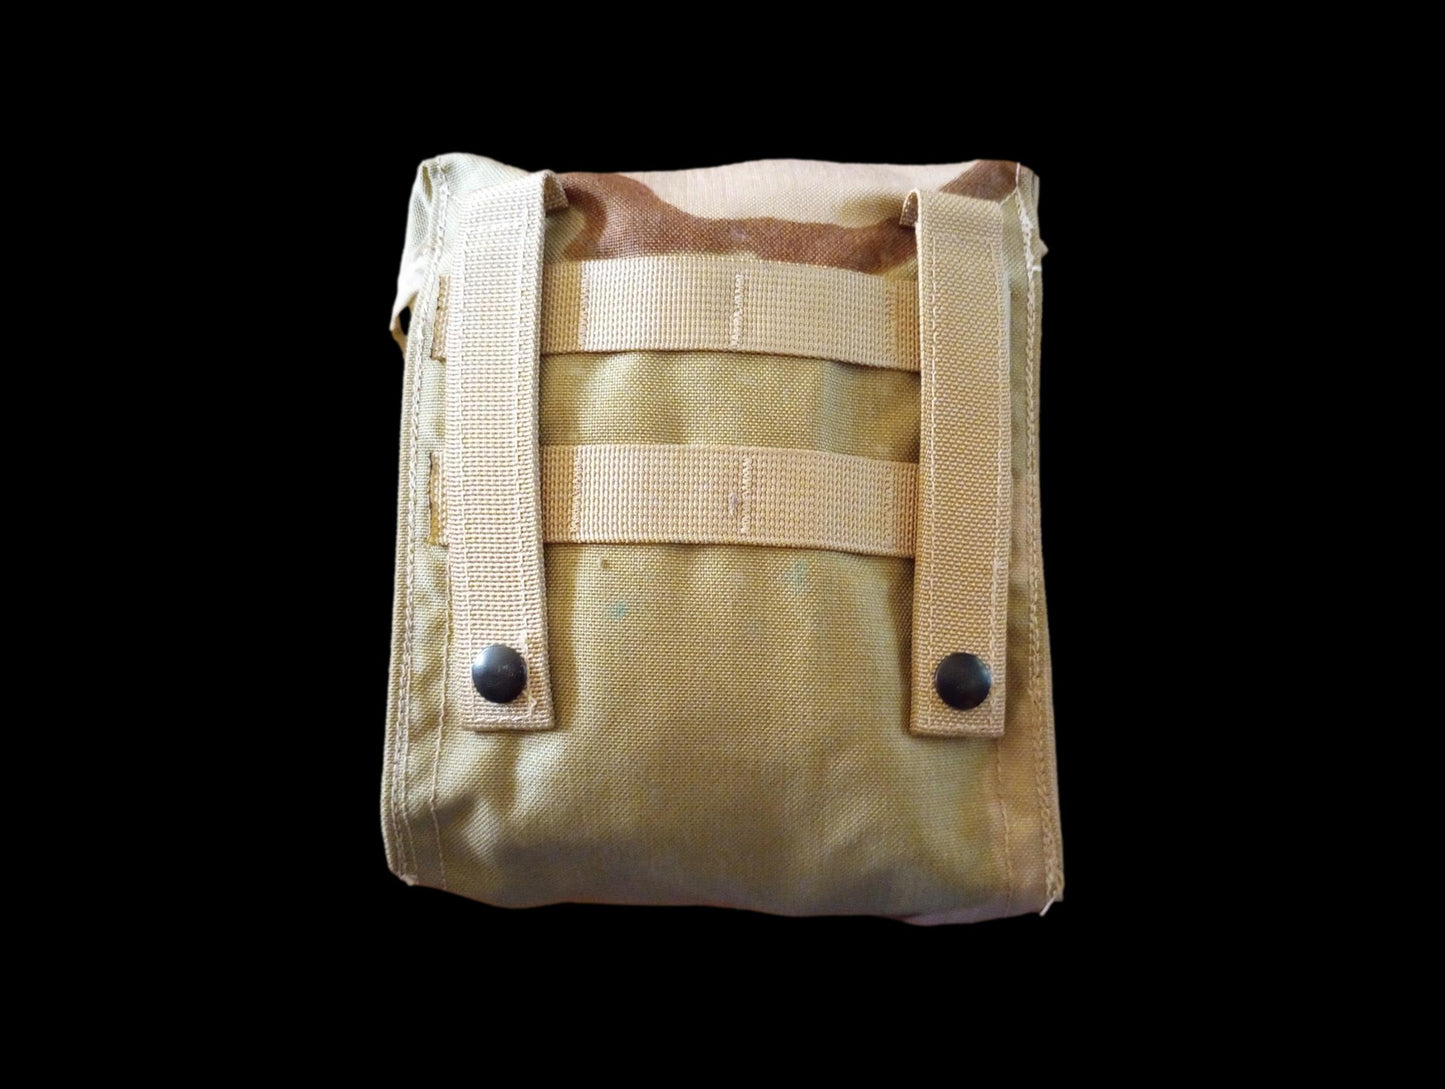 U.S MILITARY ISSUE AMMO DUMP BAG POUCH SMALL ARMS 200 ROUND SAW POUCH .223 CAMO